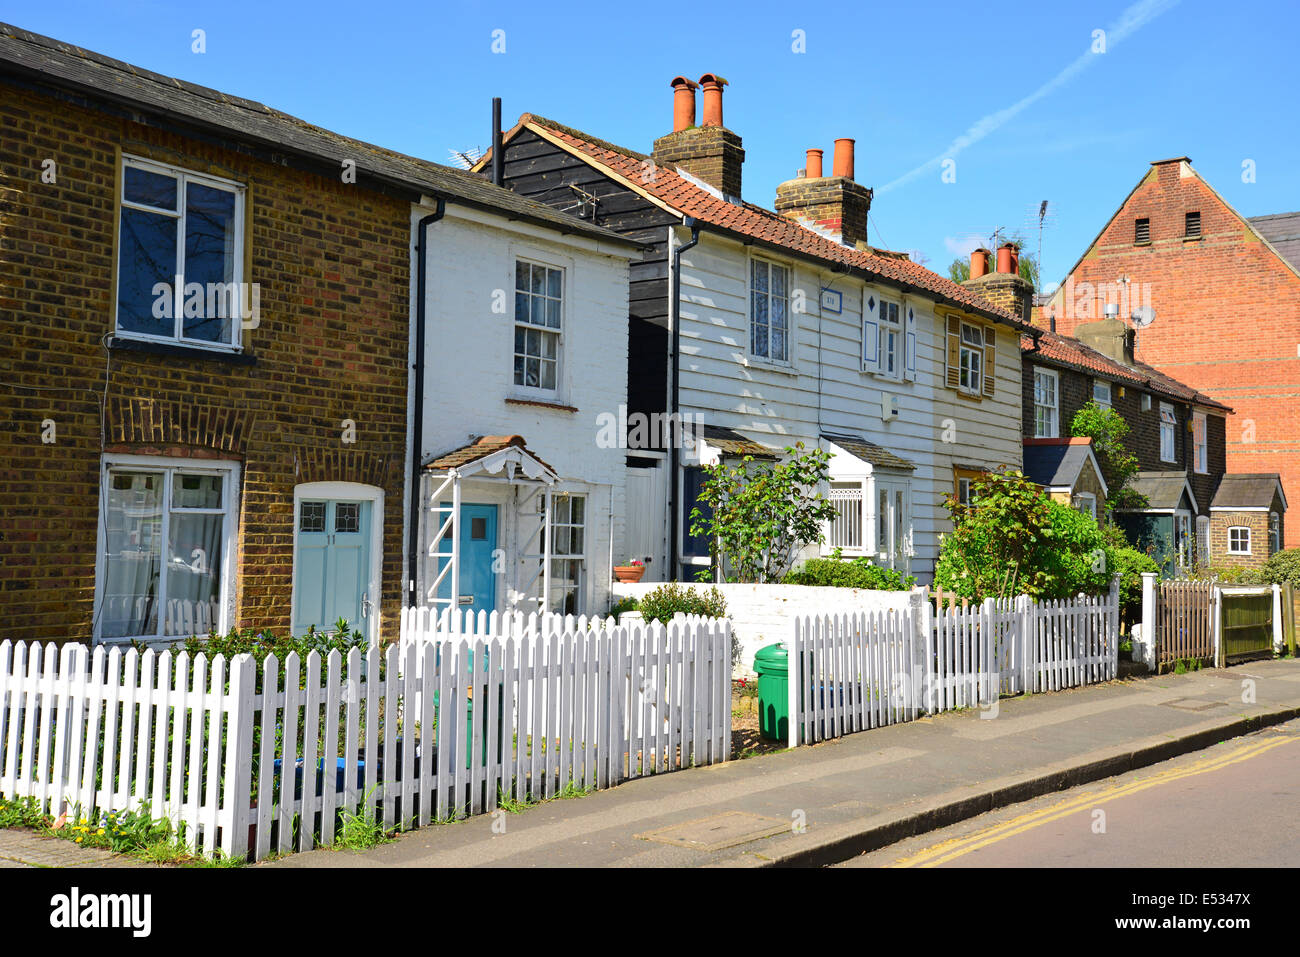 Period cottages on The Green, Twickenham, London Borough of Richmond upon Thames, Greater London, England, United Kingdom Stock Photo